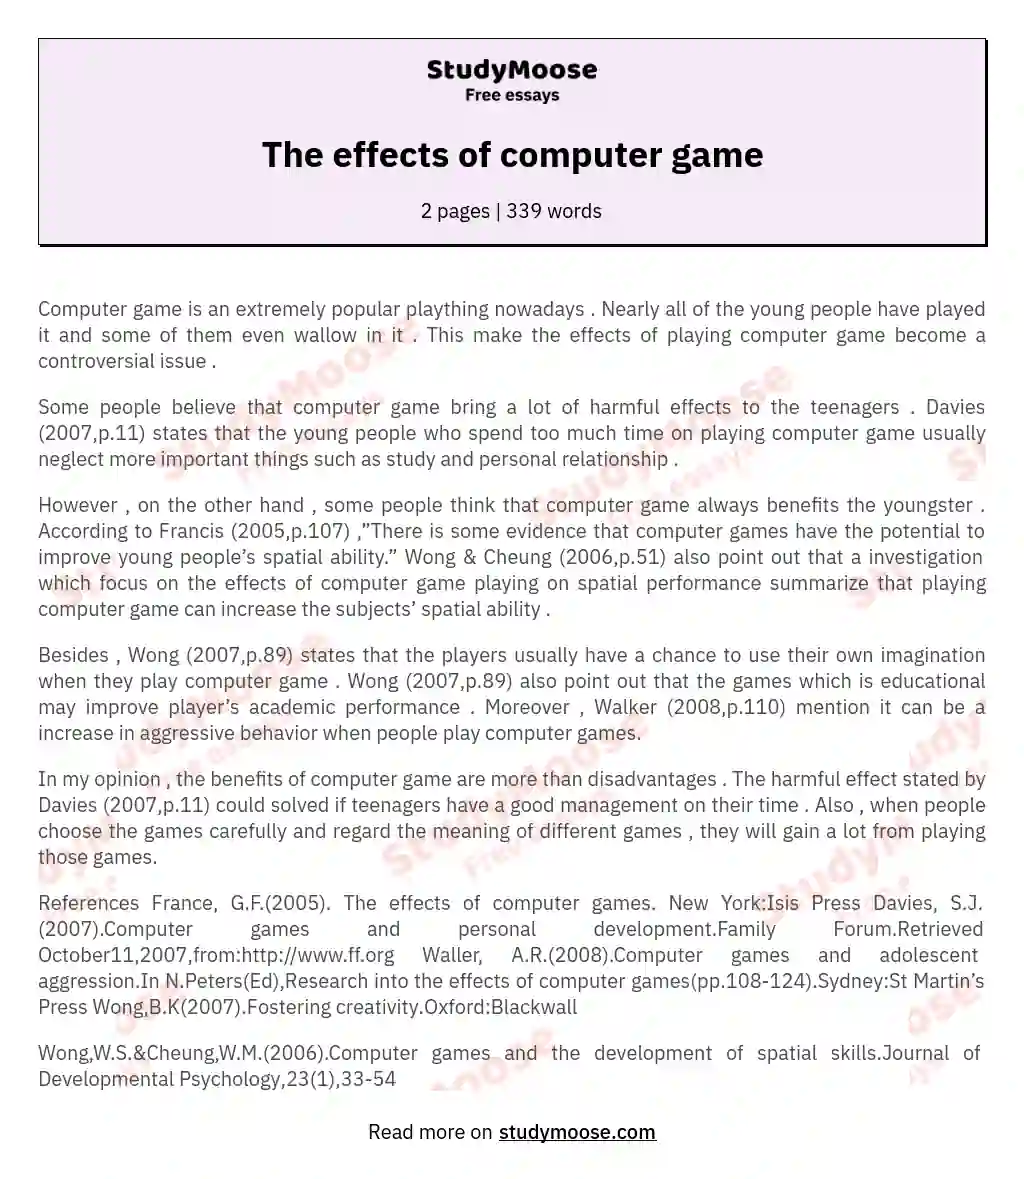 The effects of computer game essay